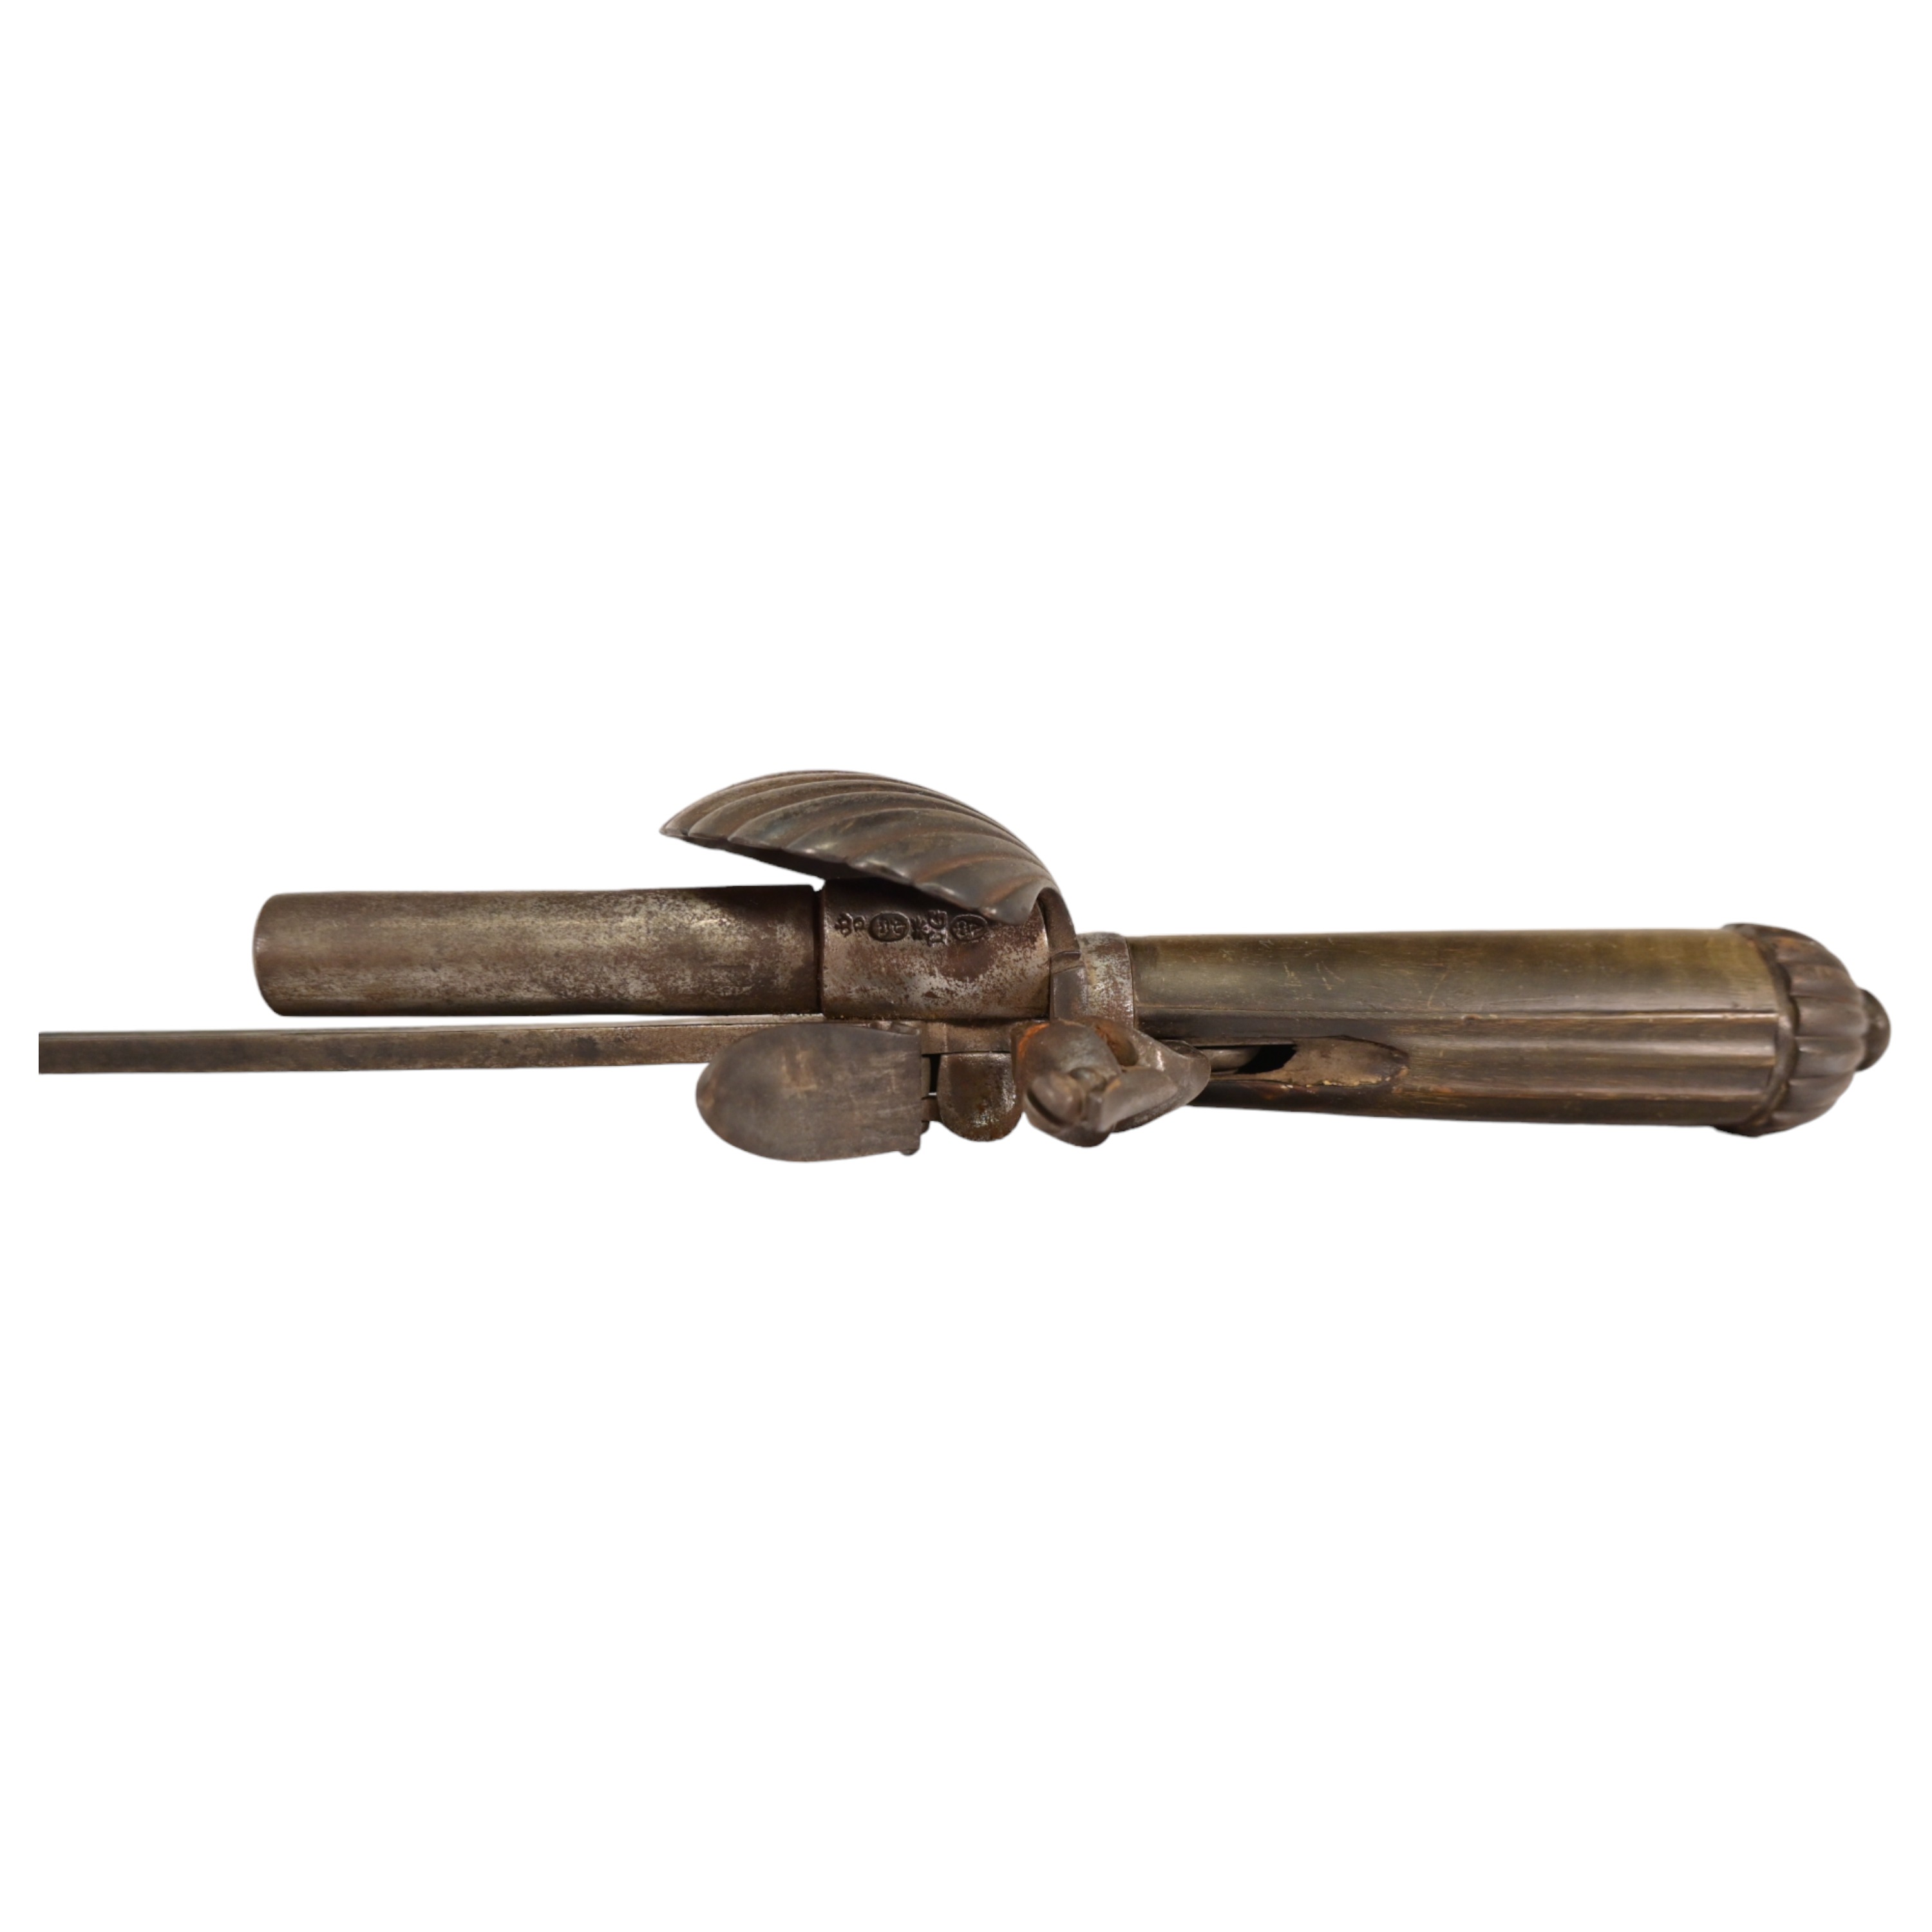 A FLINT LOCK HUNTING SWORD PISTOL WITH SHELL GUARD, IN THE ENGLISH TASTE, LAST HALF 18TH CENTURY. - Image 10 of 13